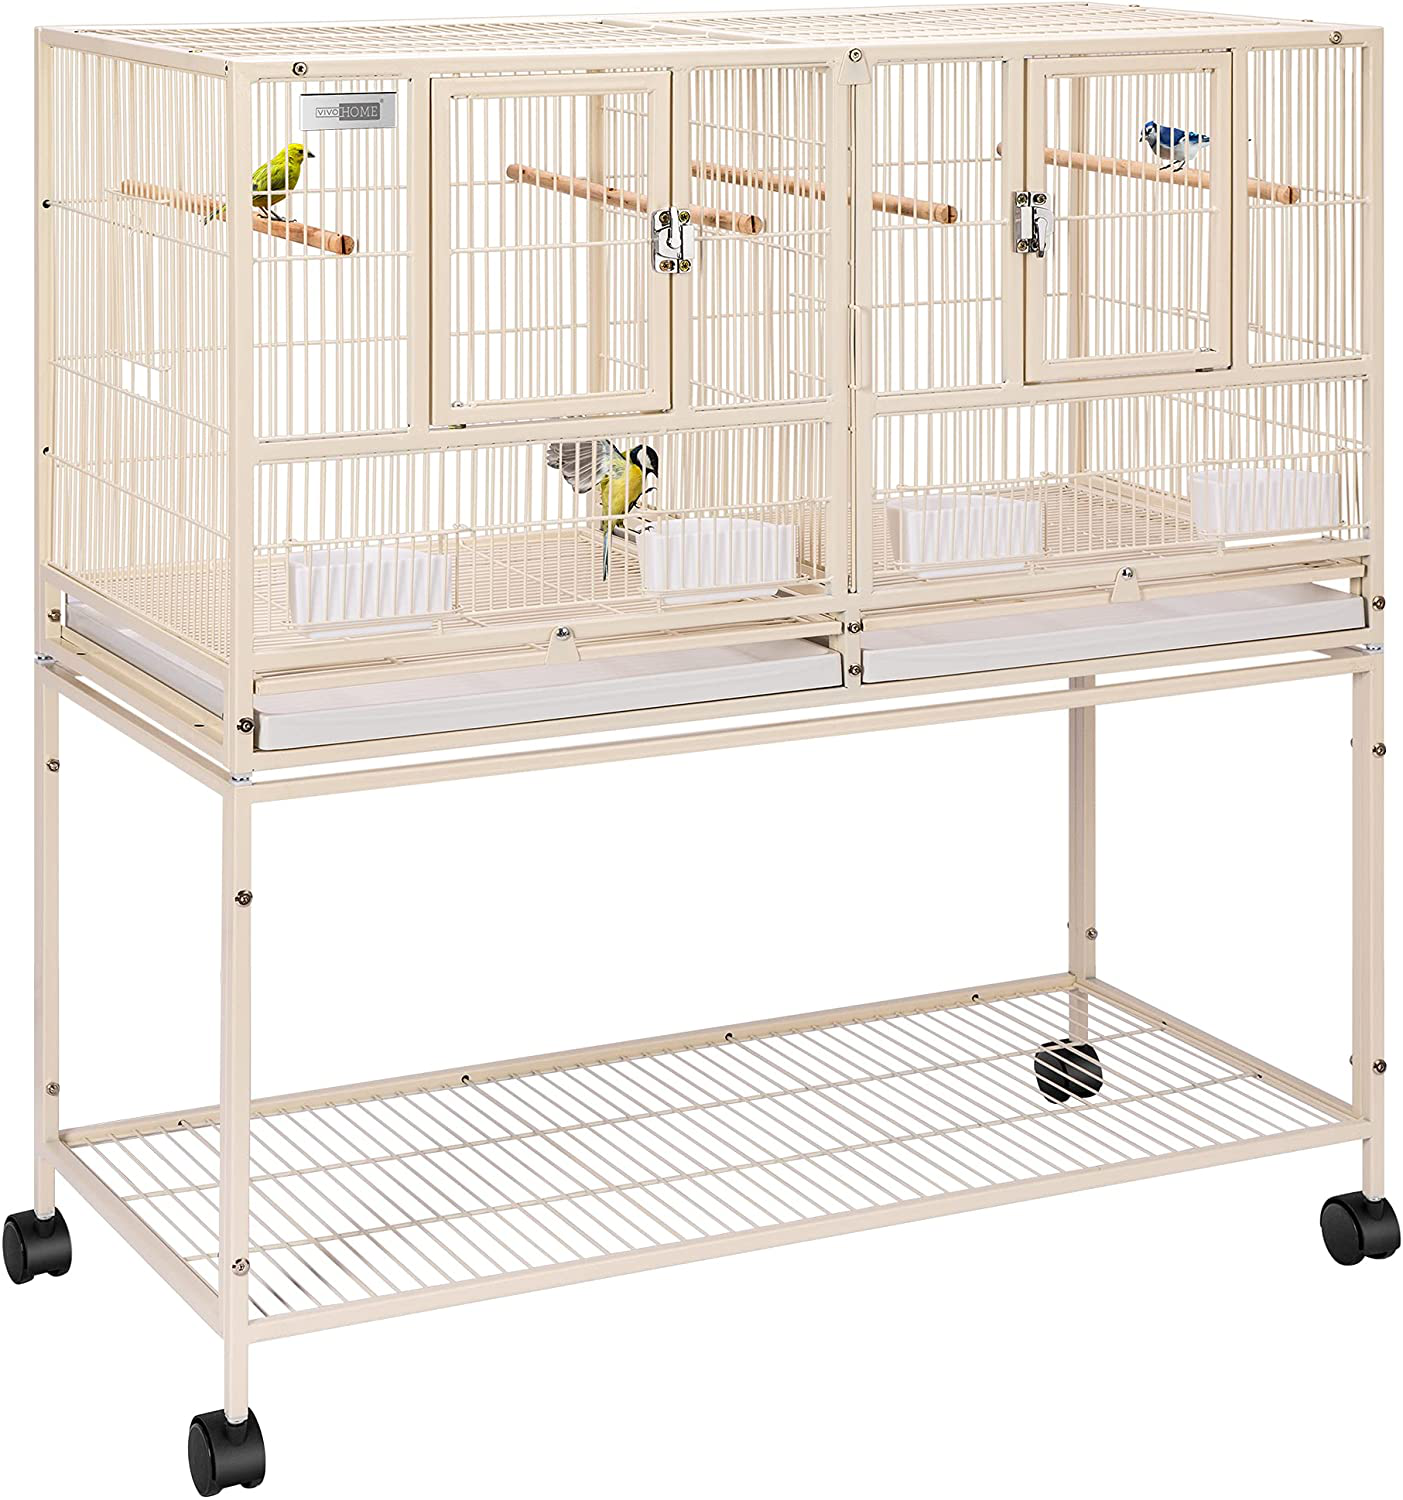 VIVOHOME 41.5 Inch Stackable Divided Breeding Iron Bird Cage